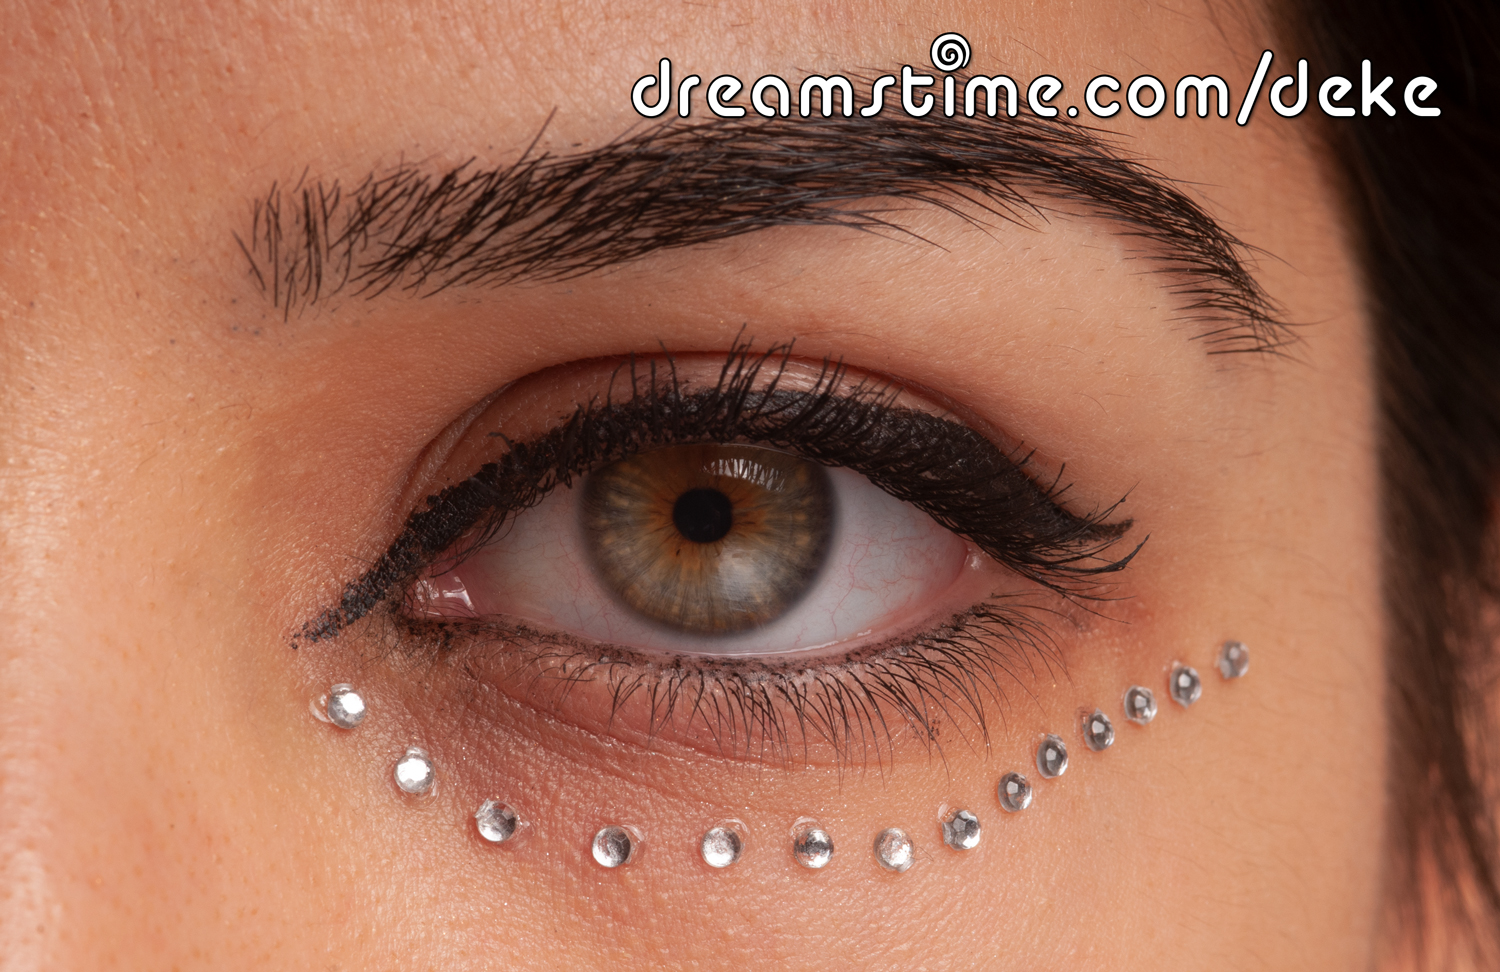 Photo of eye with rhinestones from Dreamstime image library